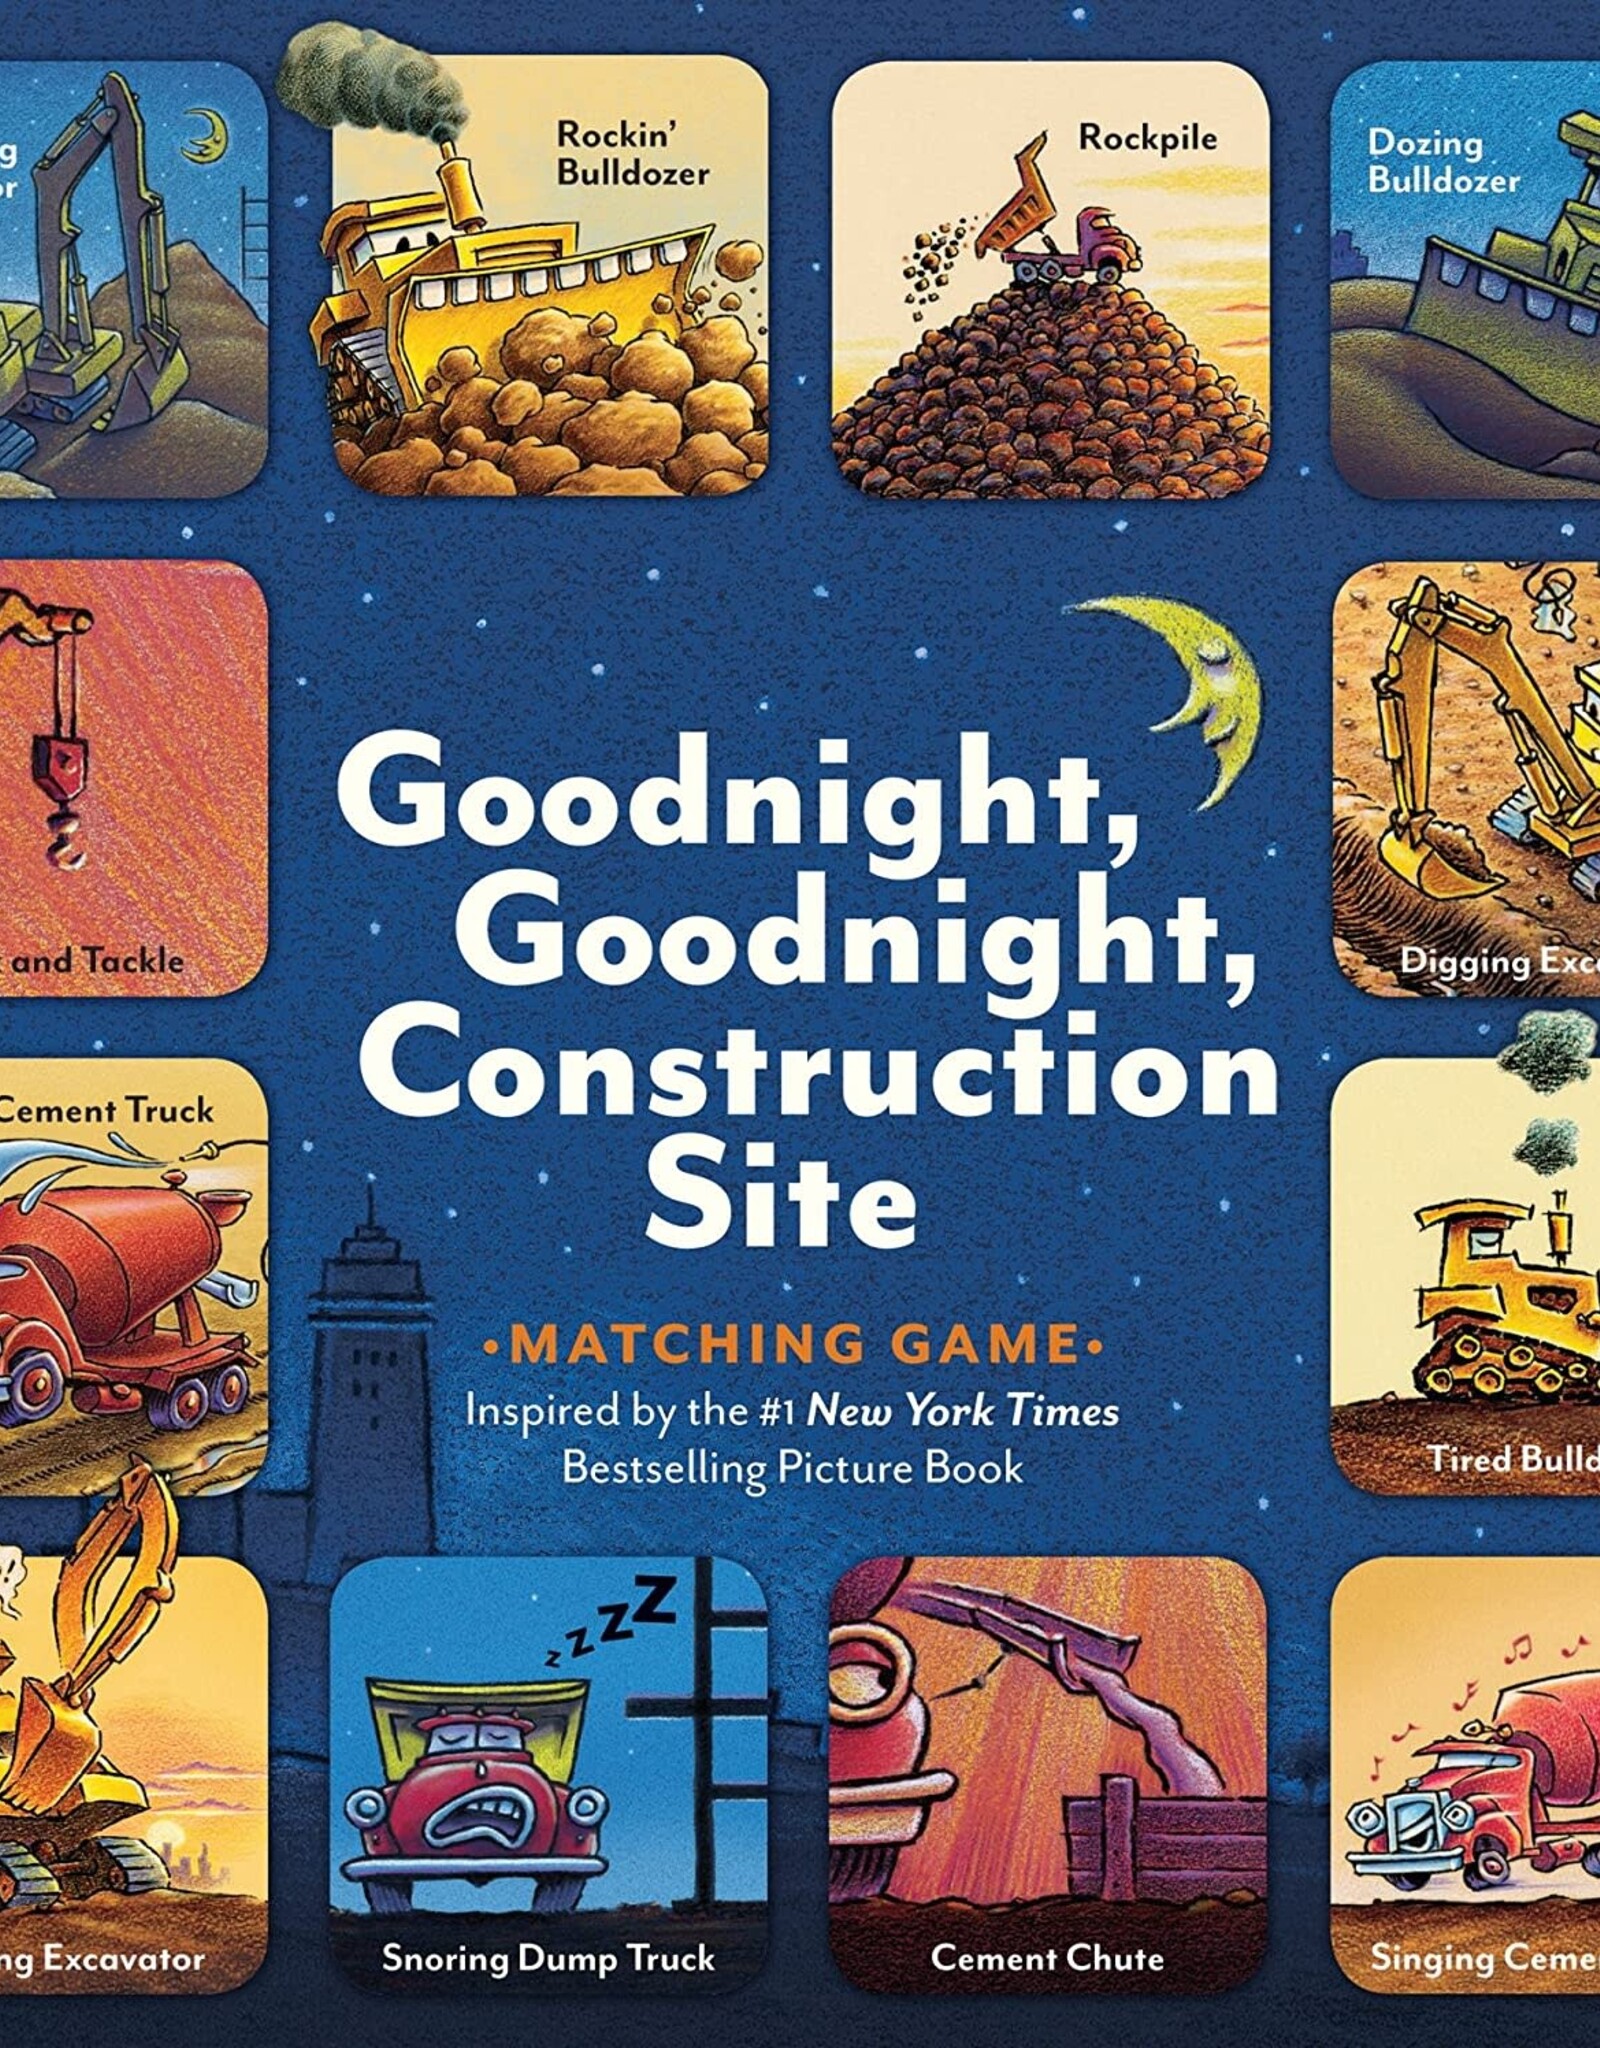 Goodnight, Goodnight, Construction Site, Matching Game